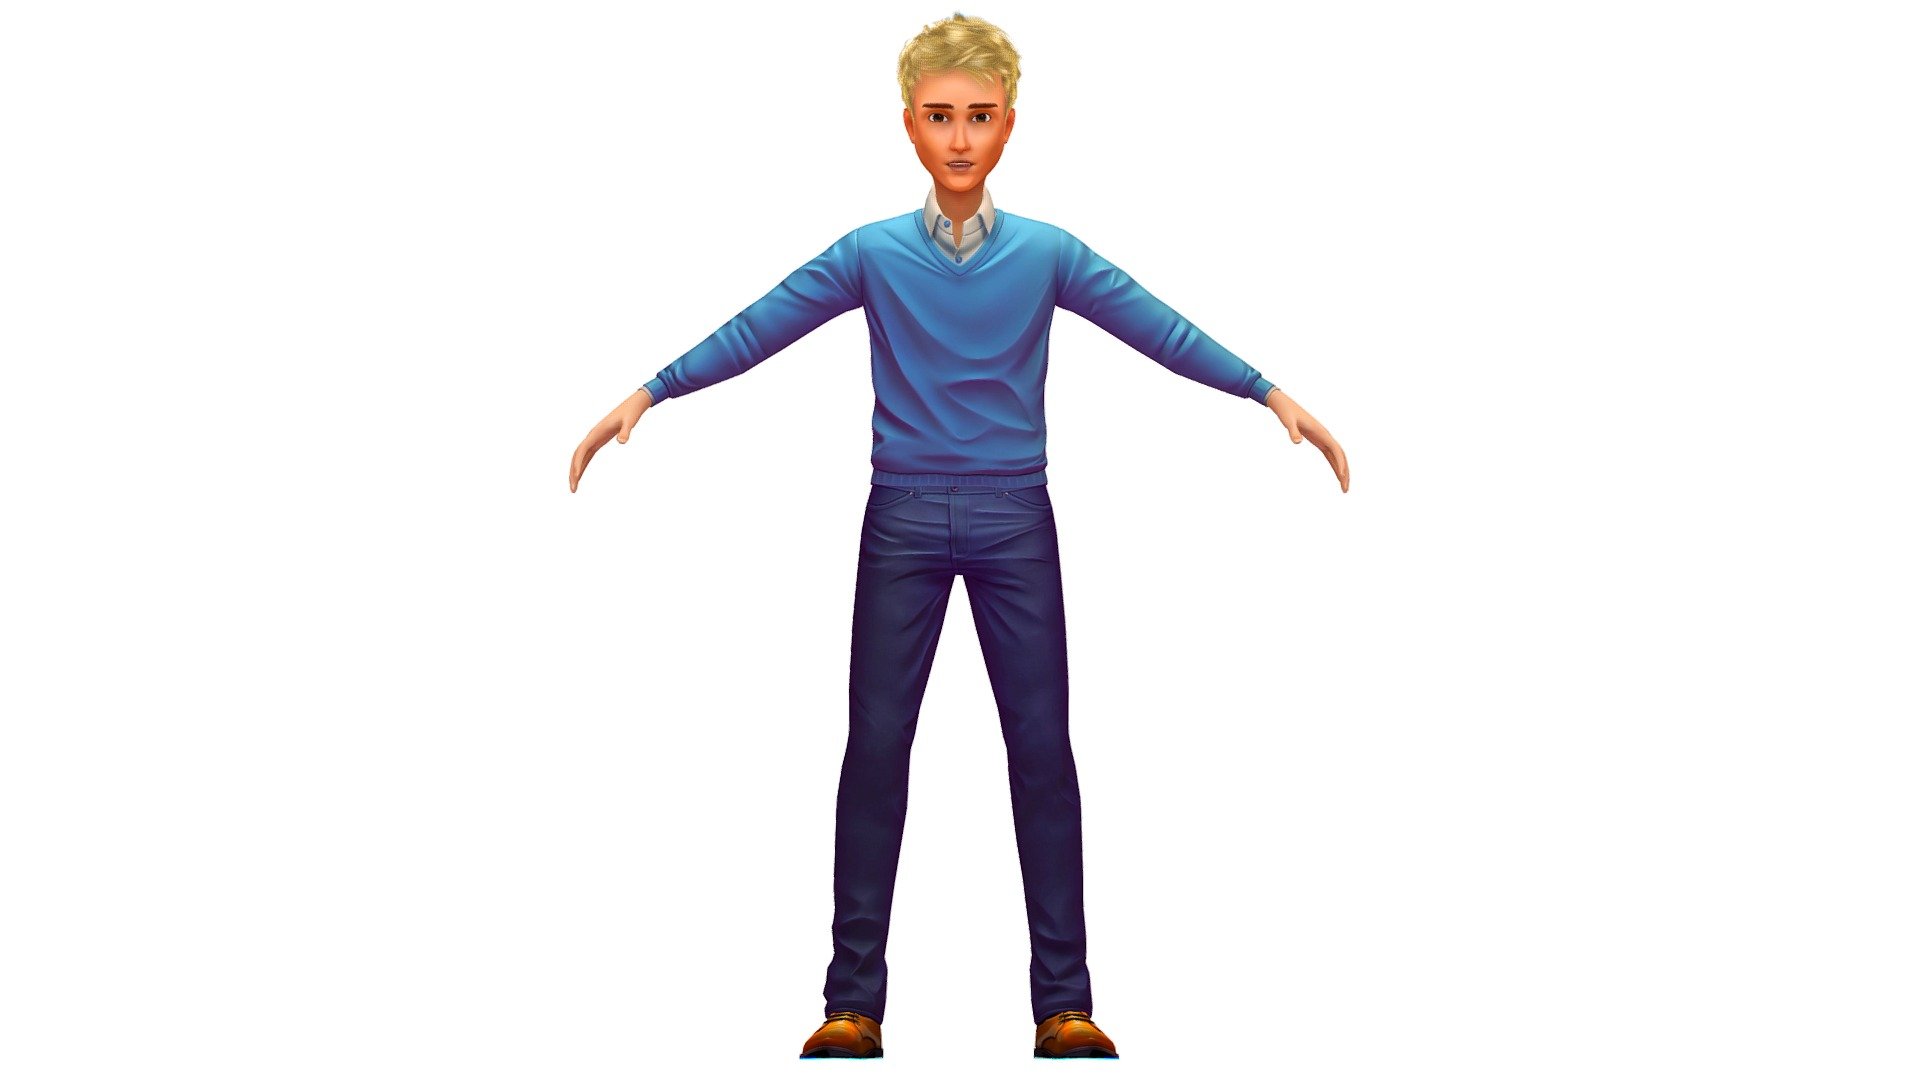 you can combine and match othercombinations using the collection:

hair collection - https://skfb.ly/ovqTn

clotch collection - https://skfb.ly/ovqT7

lowpoly avatar collection - https://skfb.ly/ovqTu - Cartoon Low Poly Style Avatar 001 - Buy Royalty Free 3D model by Oleg Shuldiakov (@olegshuldiakov) 3d model